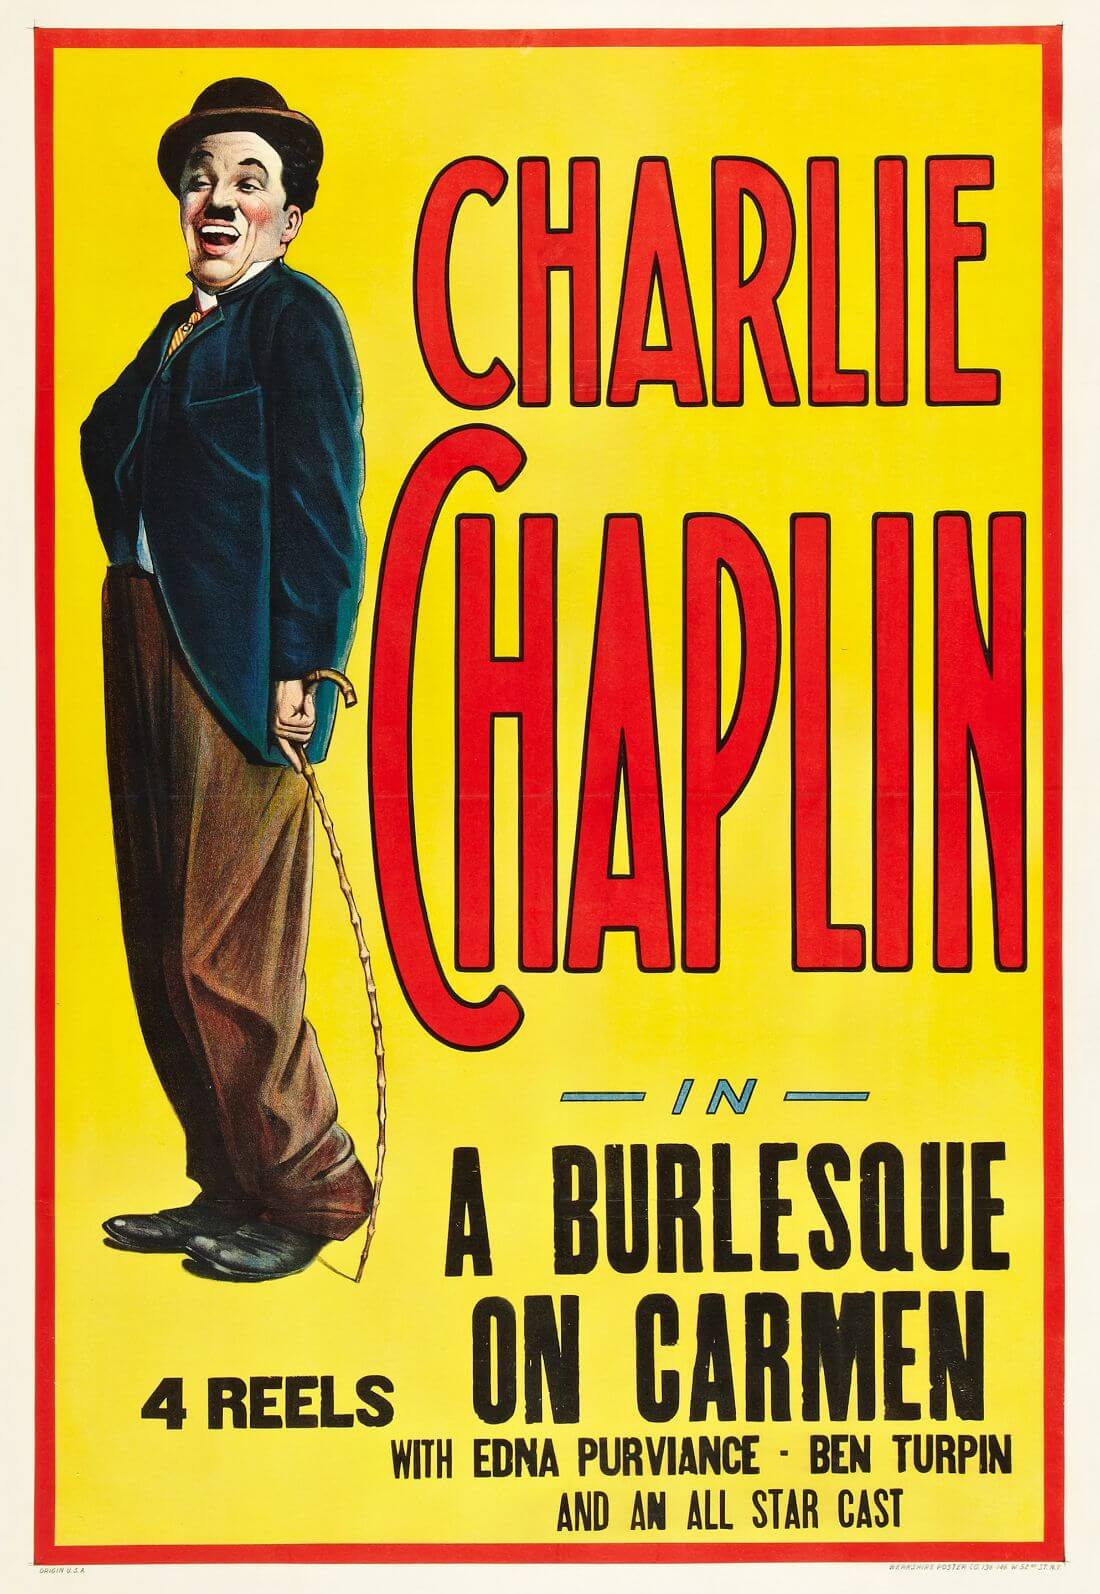 A Burlesque On Carmen Charlie Chaplin Hollywood Classics English Movie Poster Life Size Posters By Jerry Buy Posters Frames Canvas Digital Art Prints Small Compact Medium And Large Variants